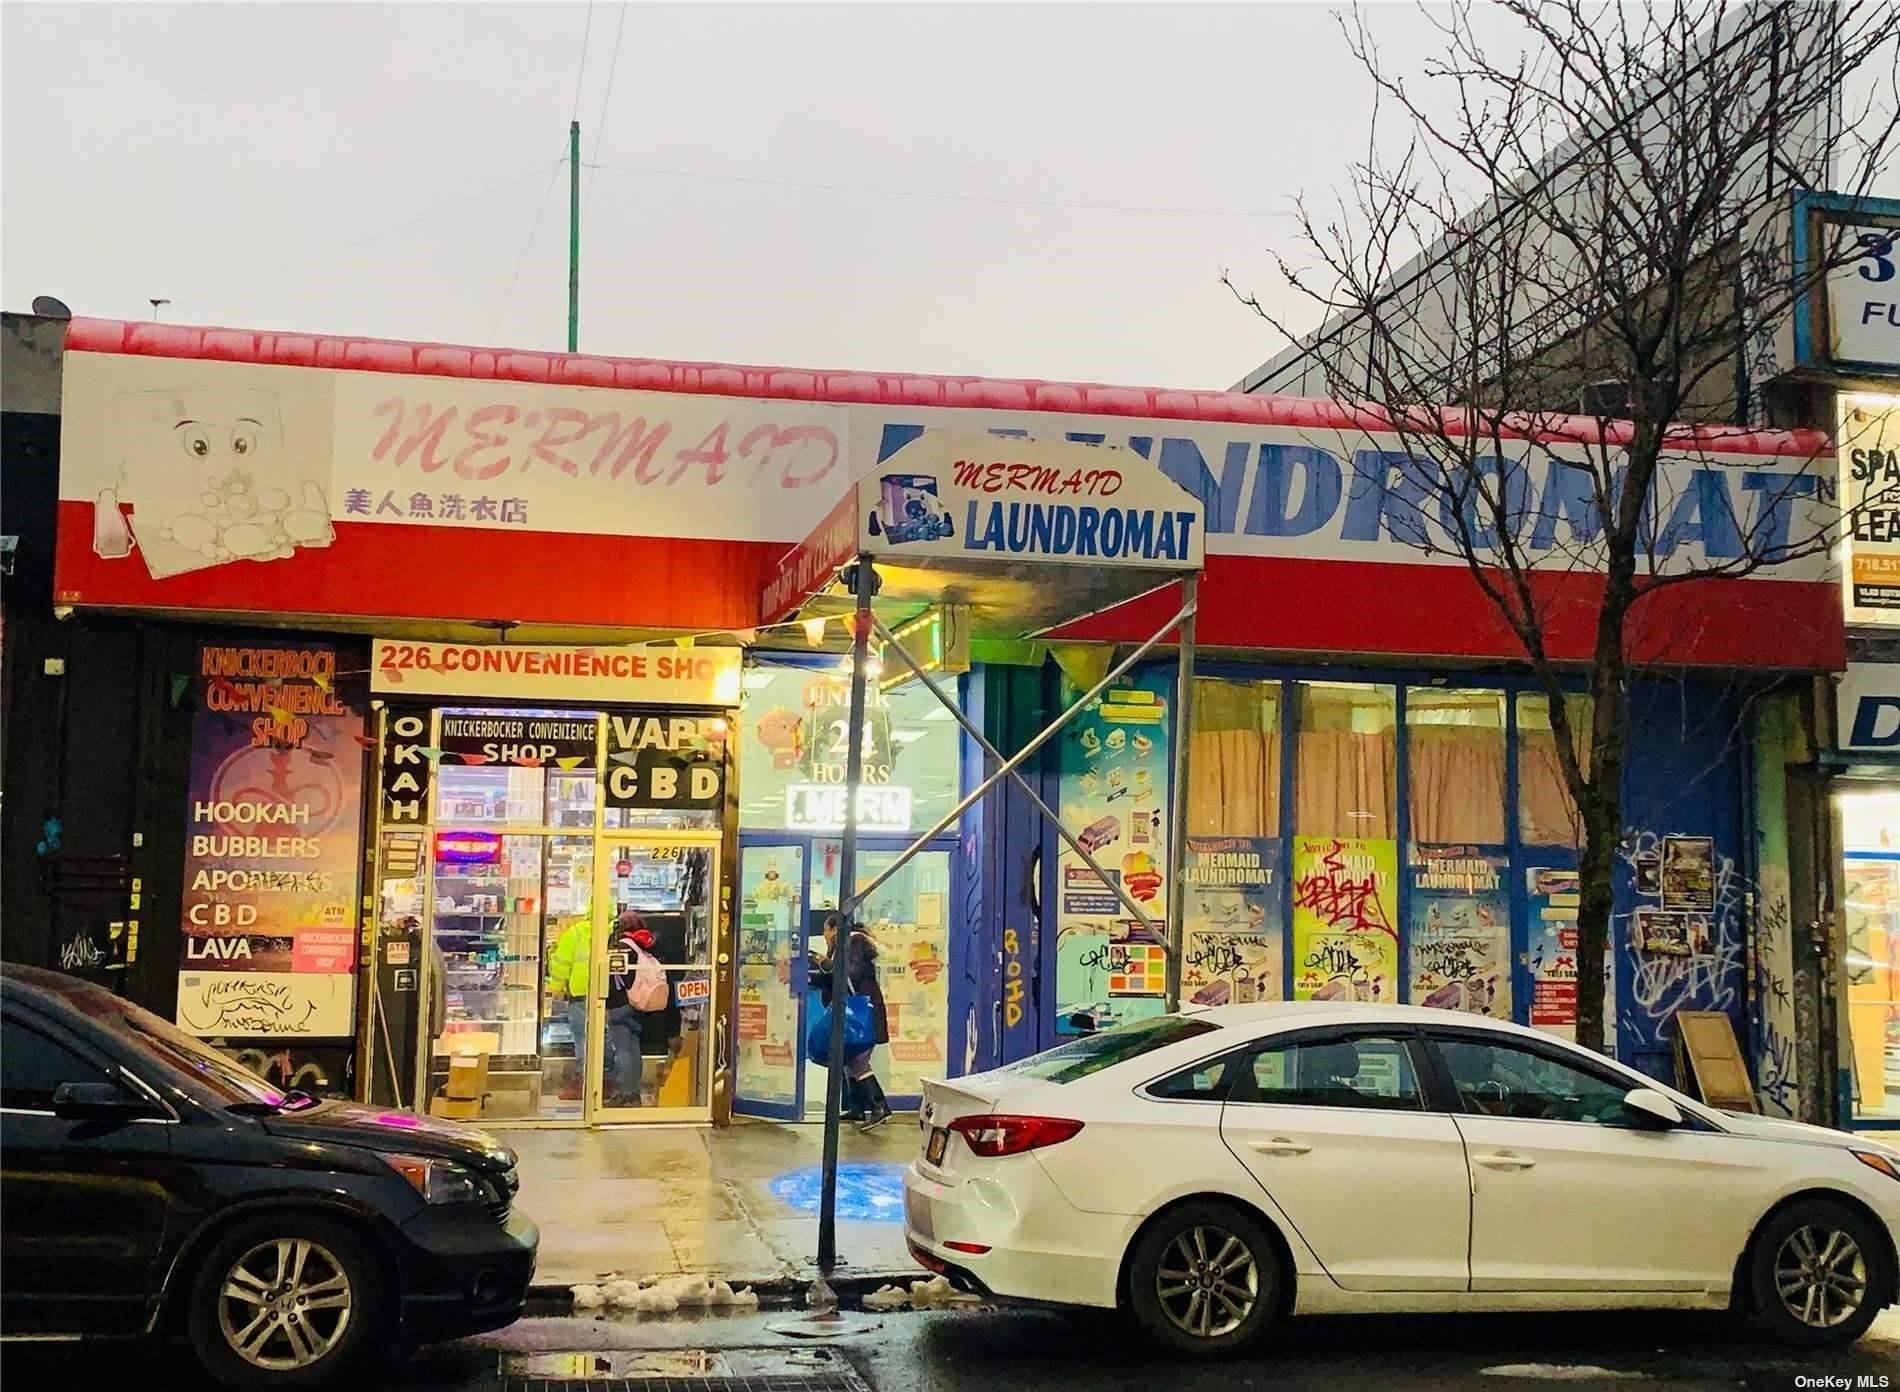 Prime, Safe amp ; Convenient location in a nice neighborhood ; Well established Drop off, Pick up, Delivery Laundromat Services on a busy street.